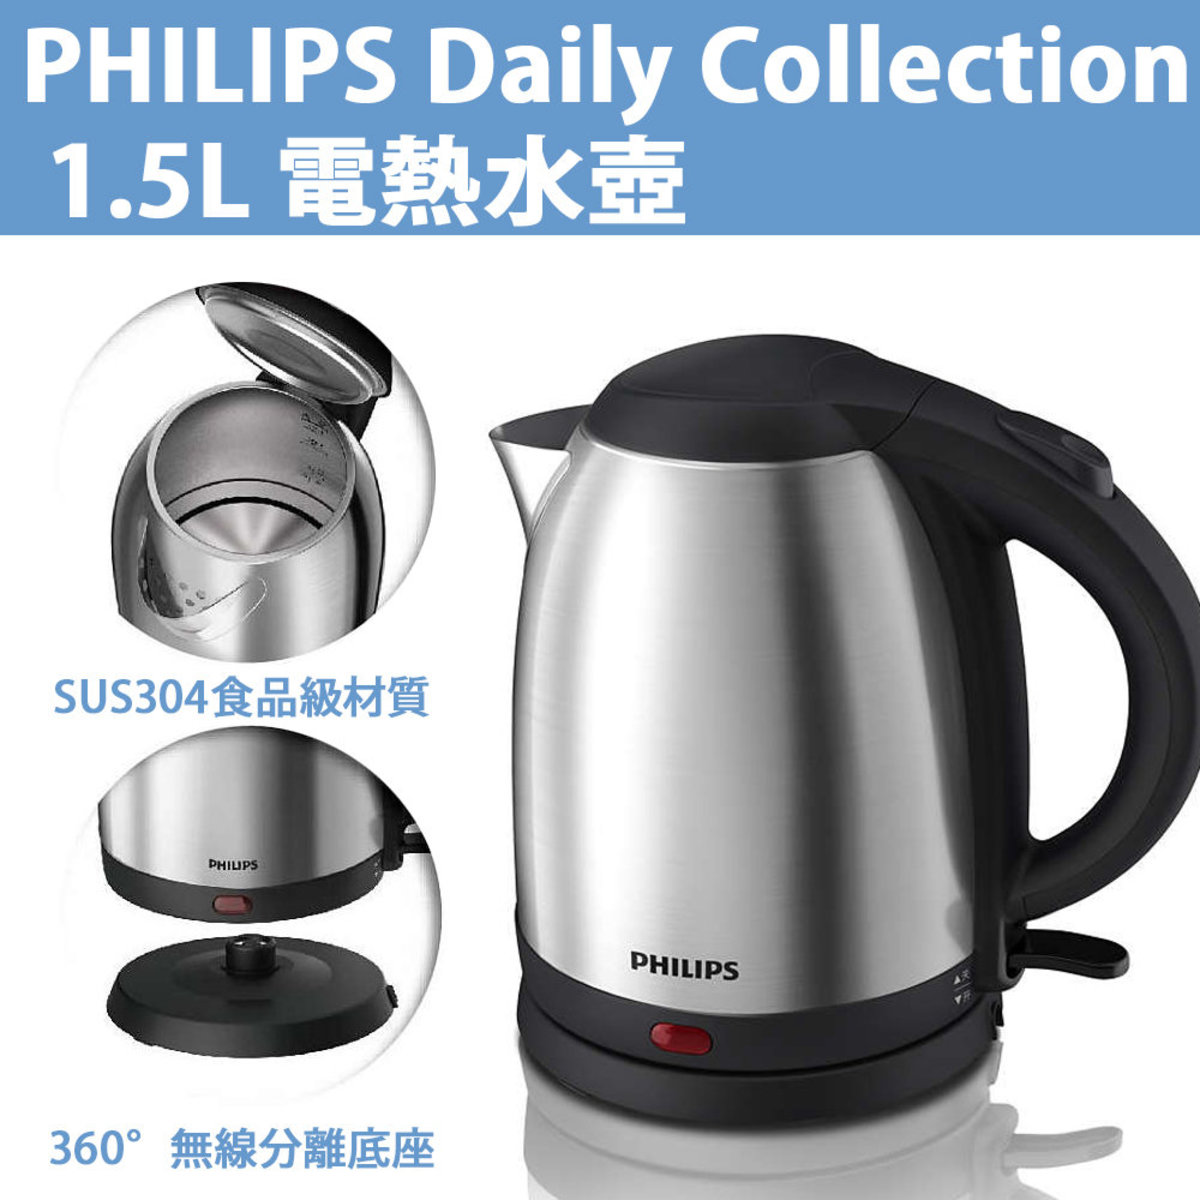 Daily Collection 1.5L Kettle - HD9306